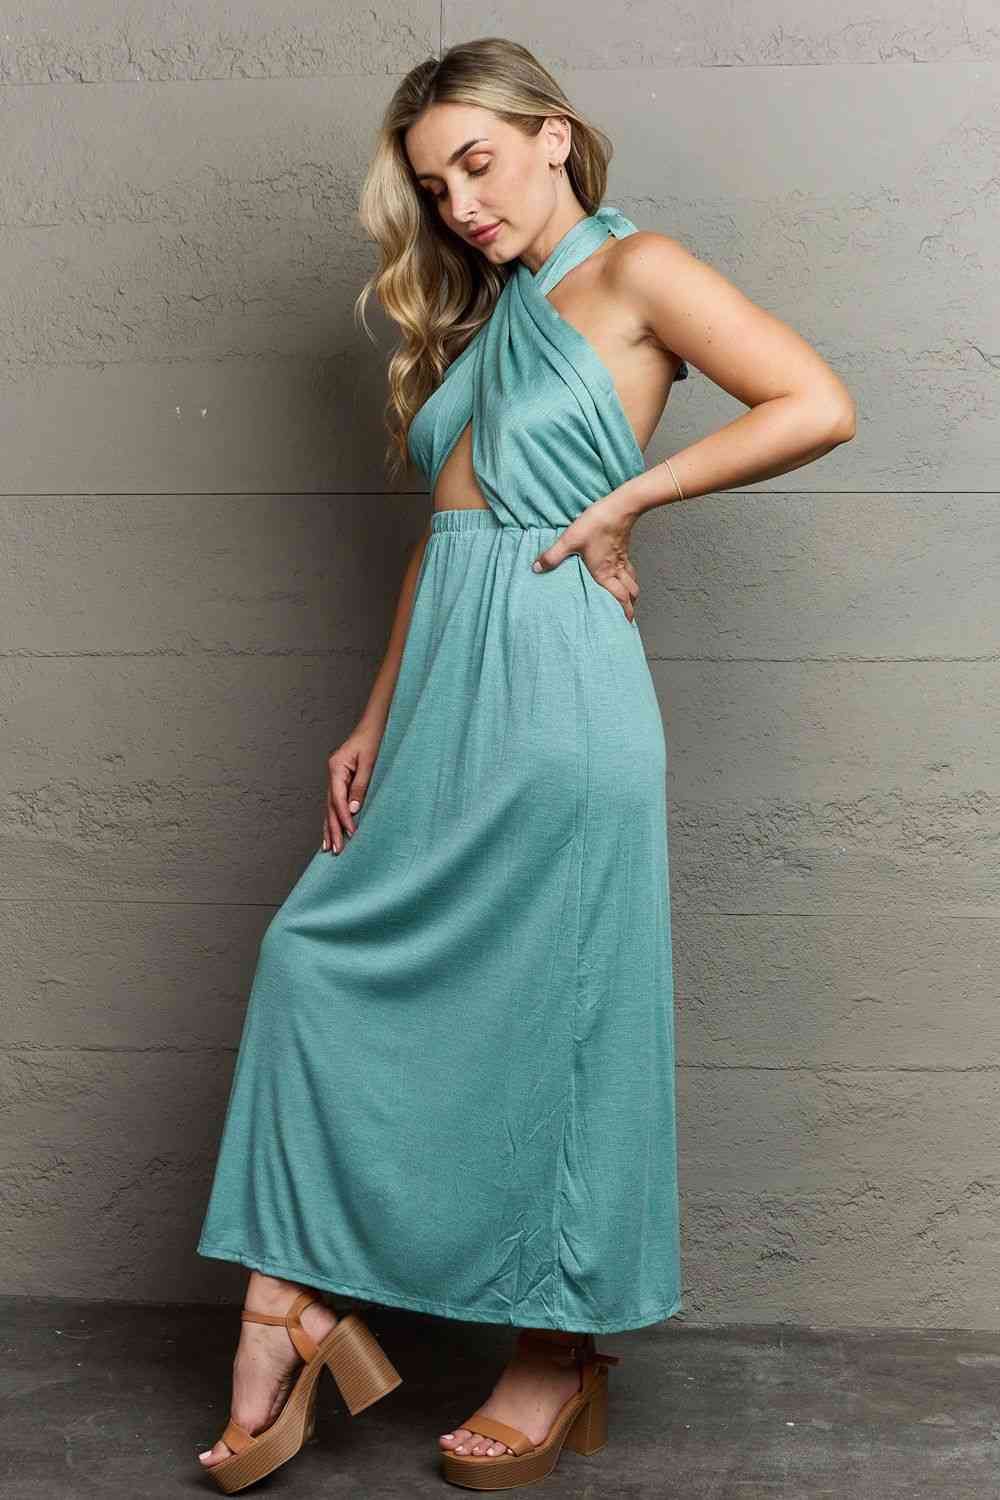 Ninexis Know Your Worth Criss Cross Halter Neck Maxi Dress Print on any thing USA/STOD clothes